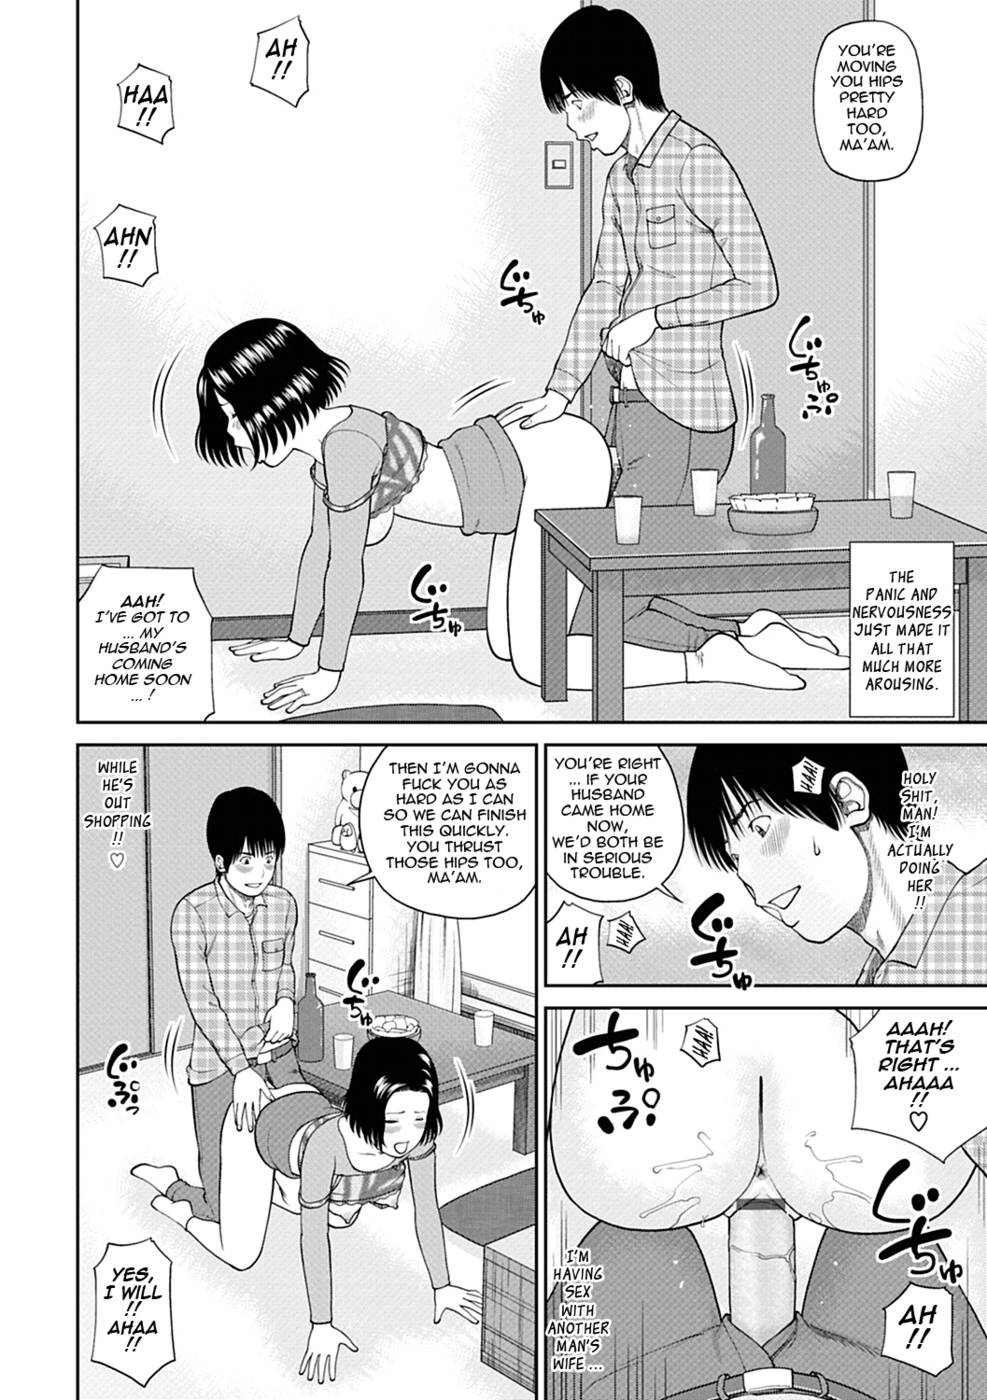 Hentai Manga Comic-34 Year Old Unsatisfied Wife-Chapter 3-Entertaining Wife-First Half-14